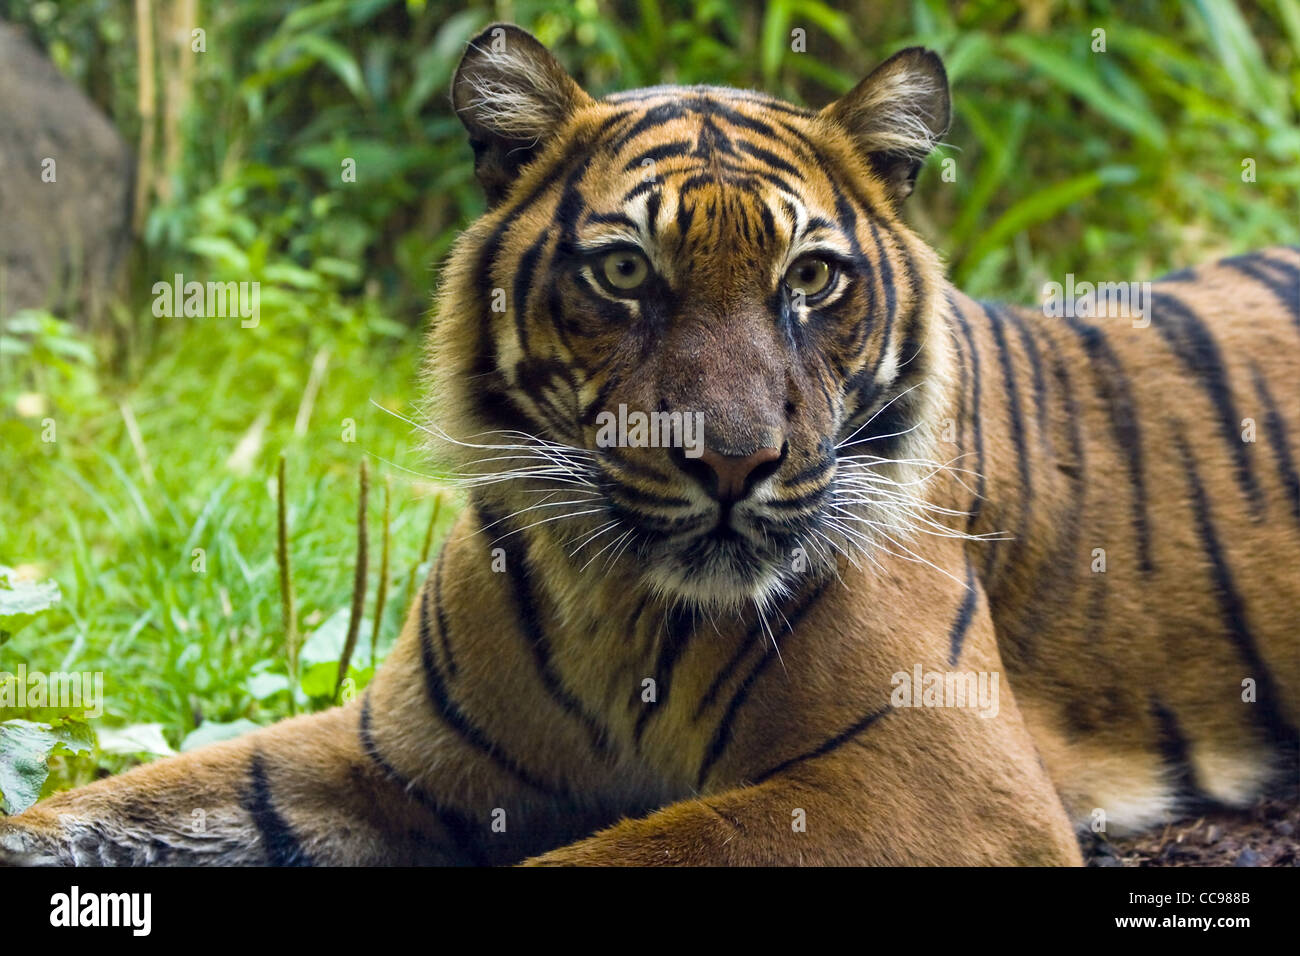 Female Indian tiger resting and looking around Stock Photo